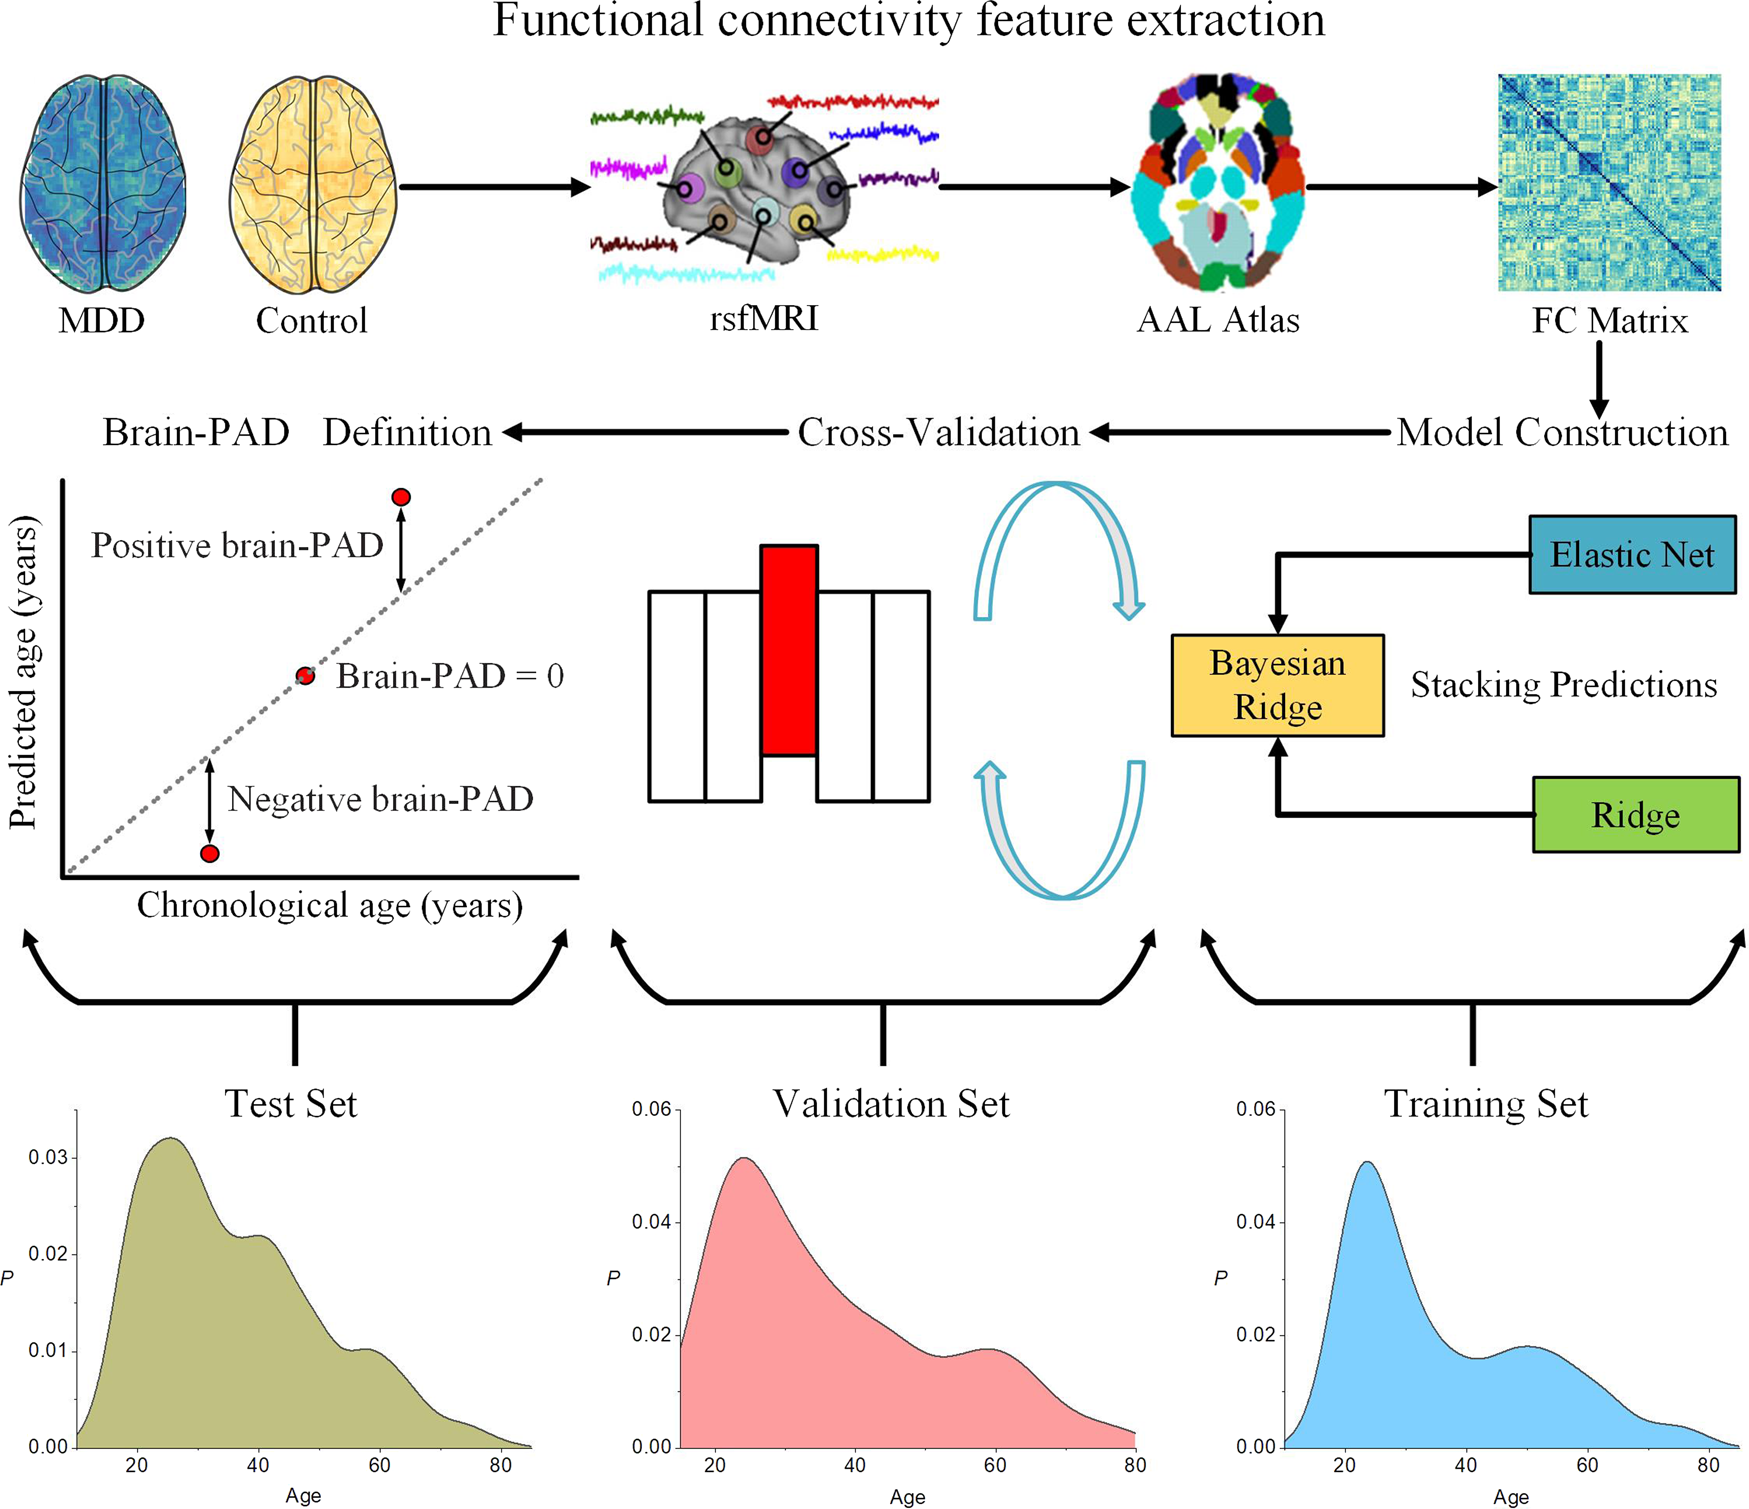 Effects of aging on functional connectivity in a neurodegenerative